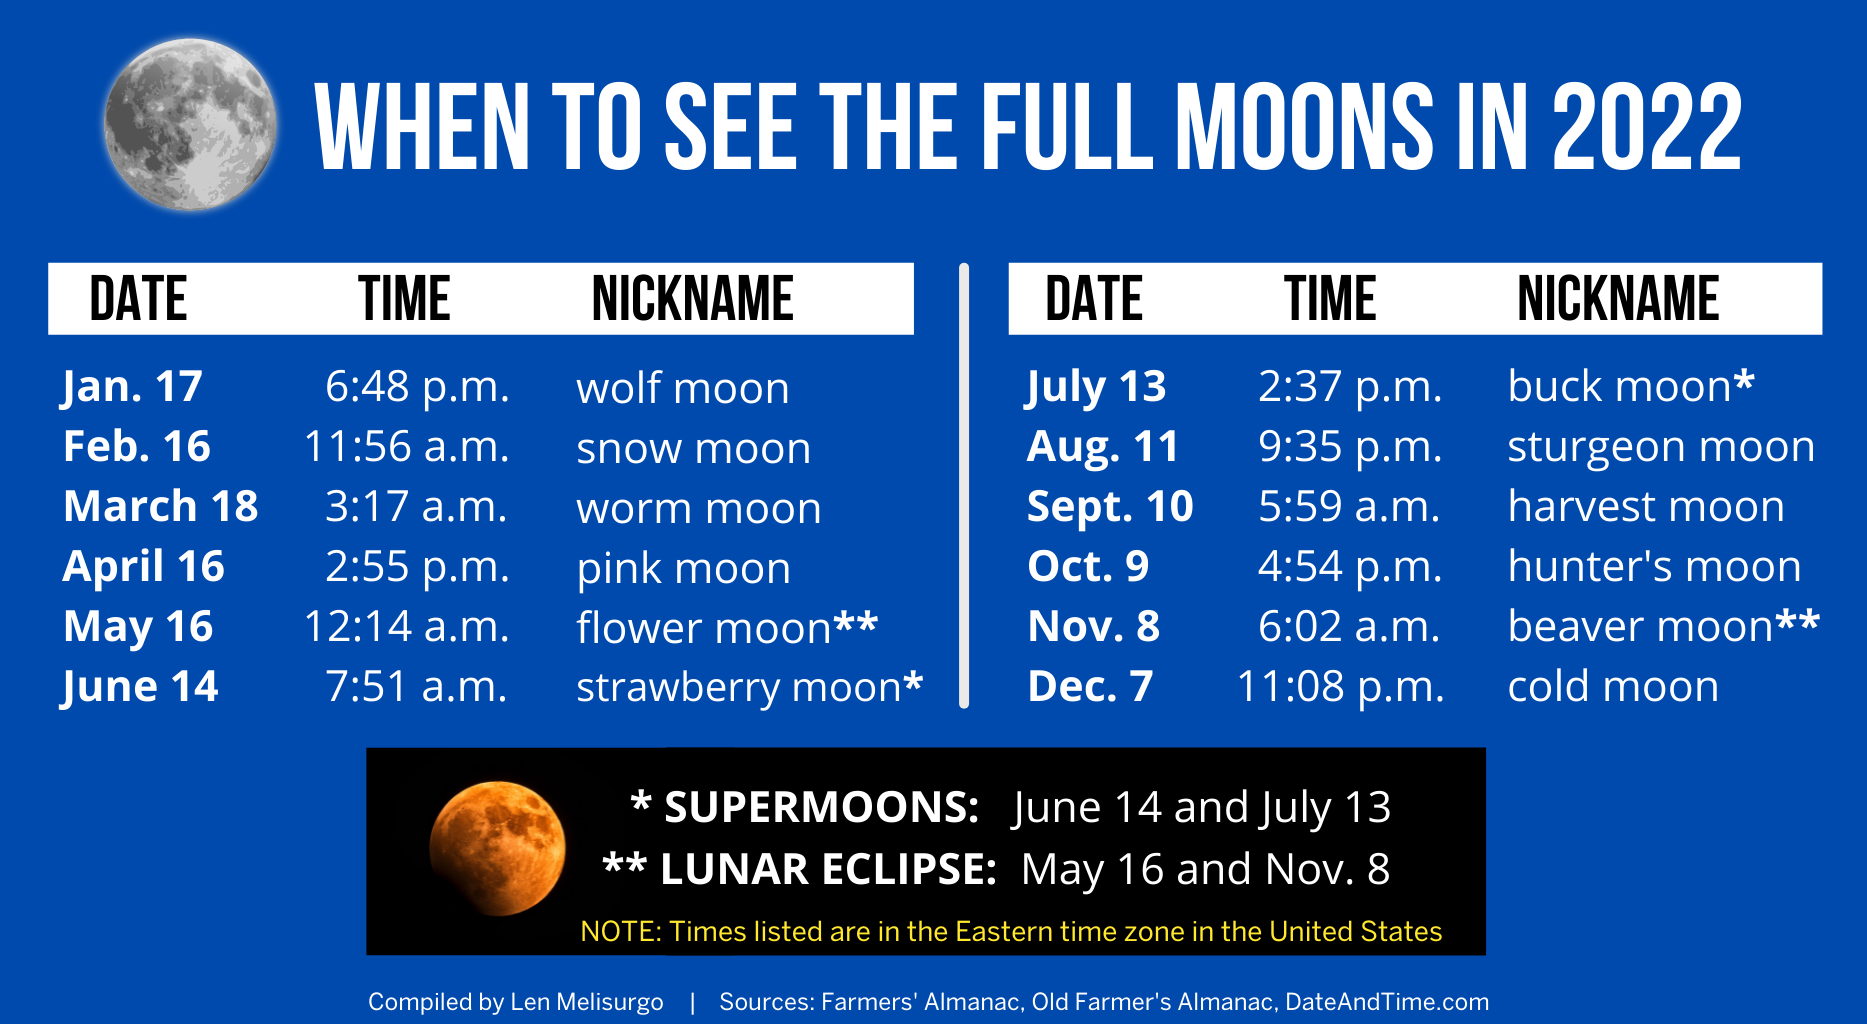 Lunar Eclipse Schedule 2022 The 12 Full Moons In 2022 Will Include 2 Supermoons, 2 Lunar Eclipses -  Nj.com